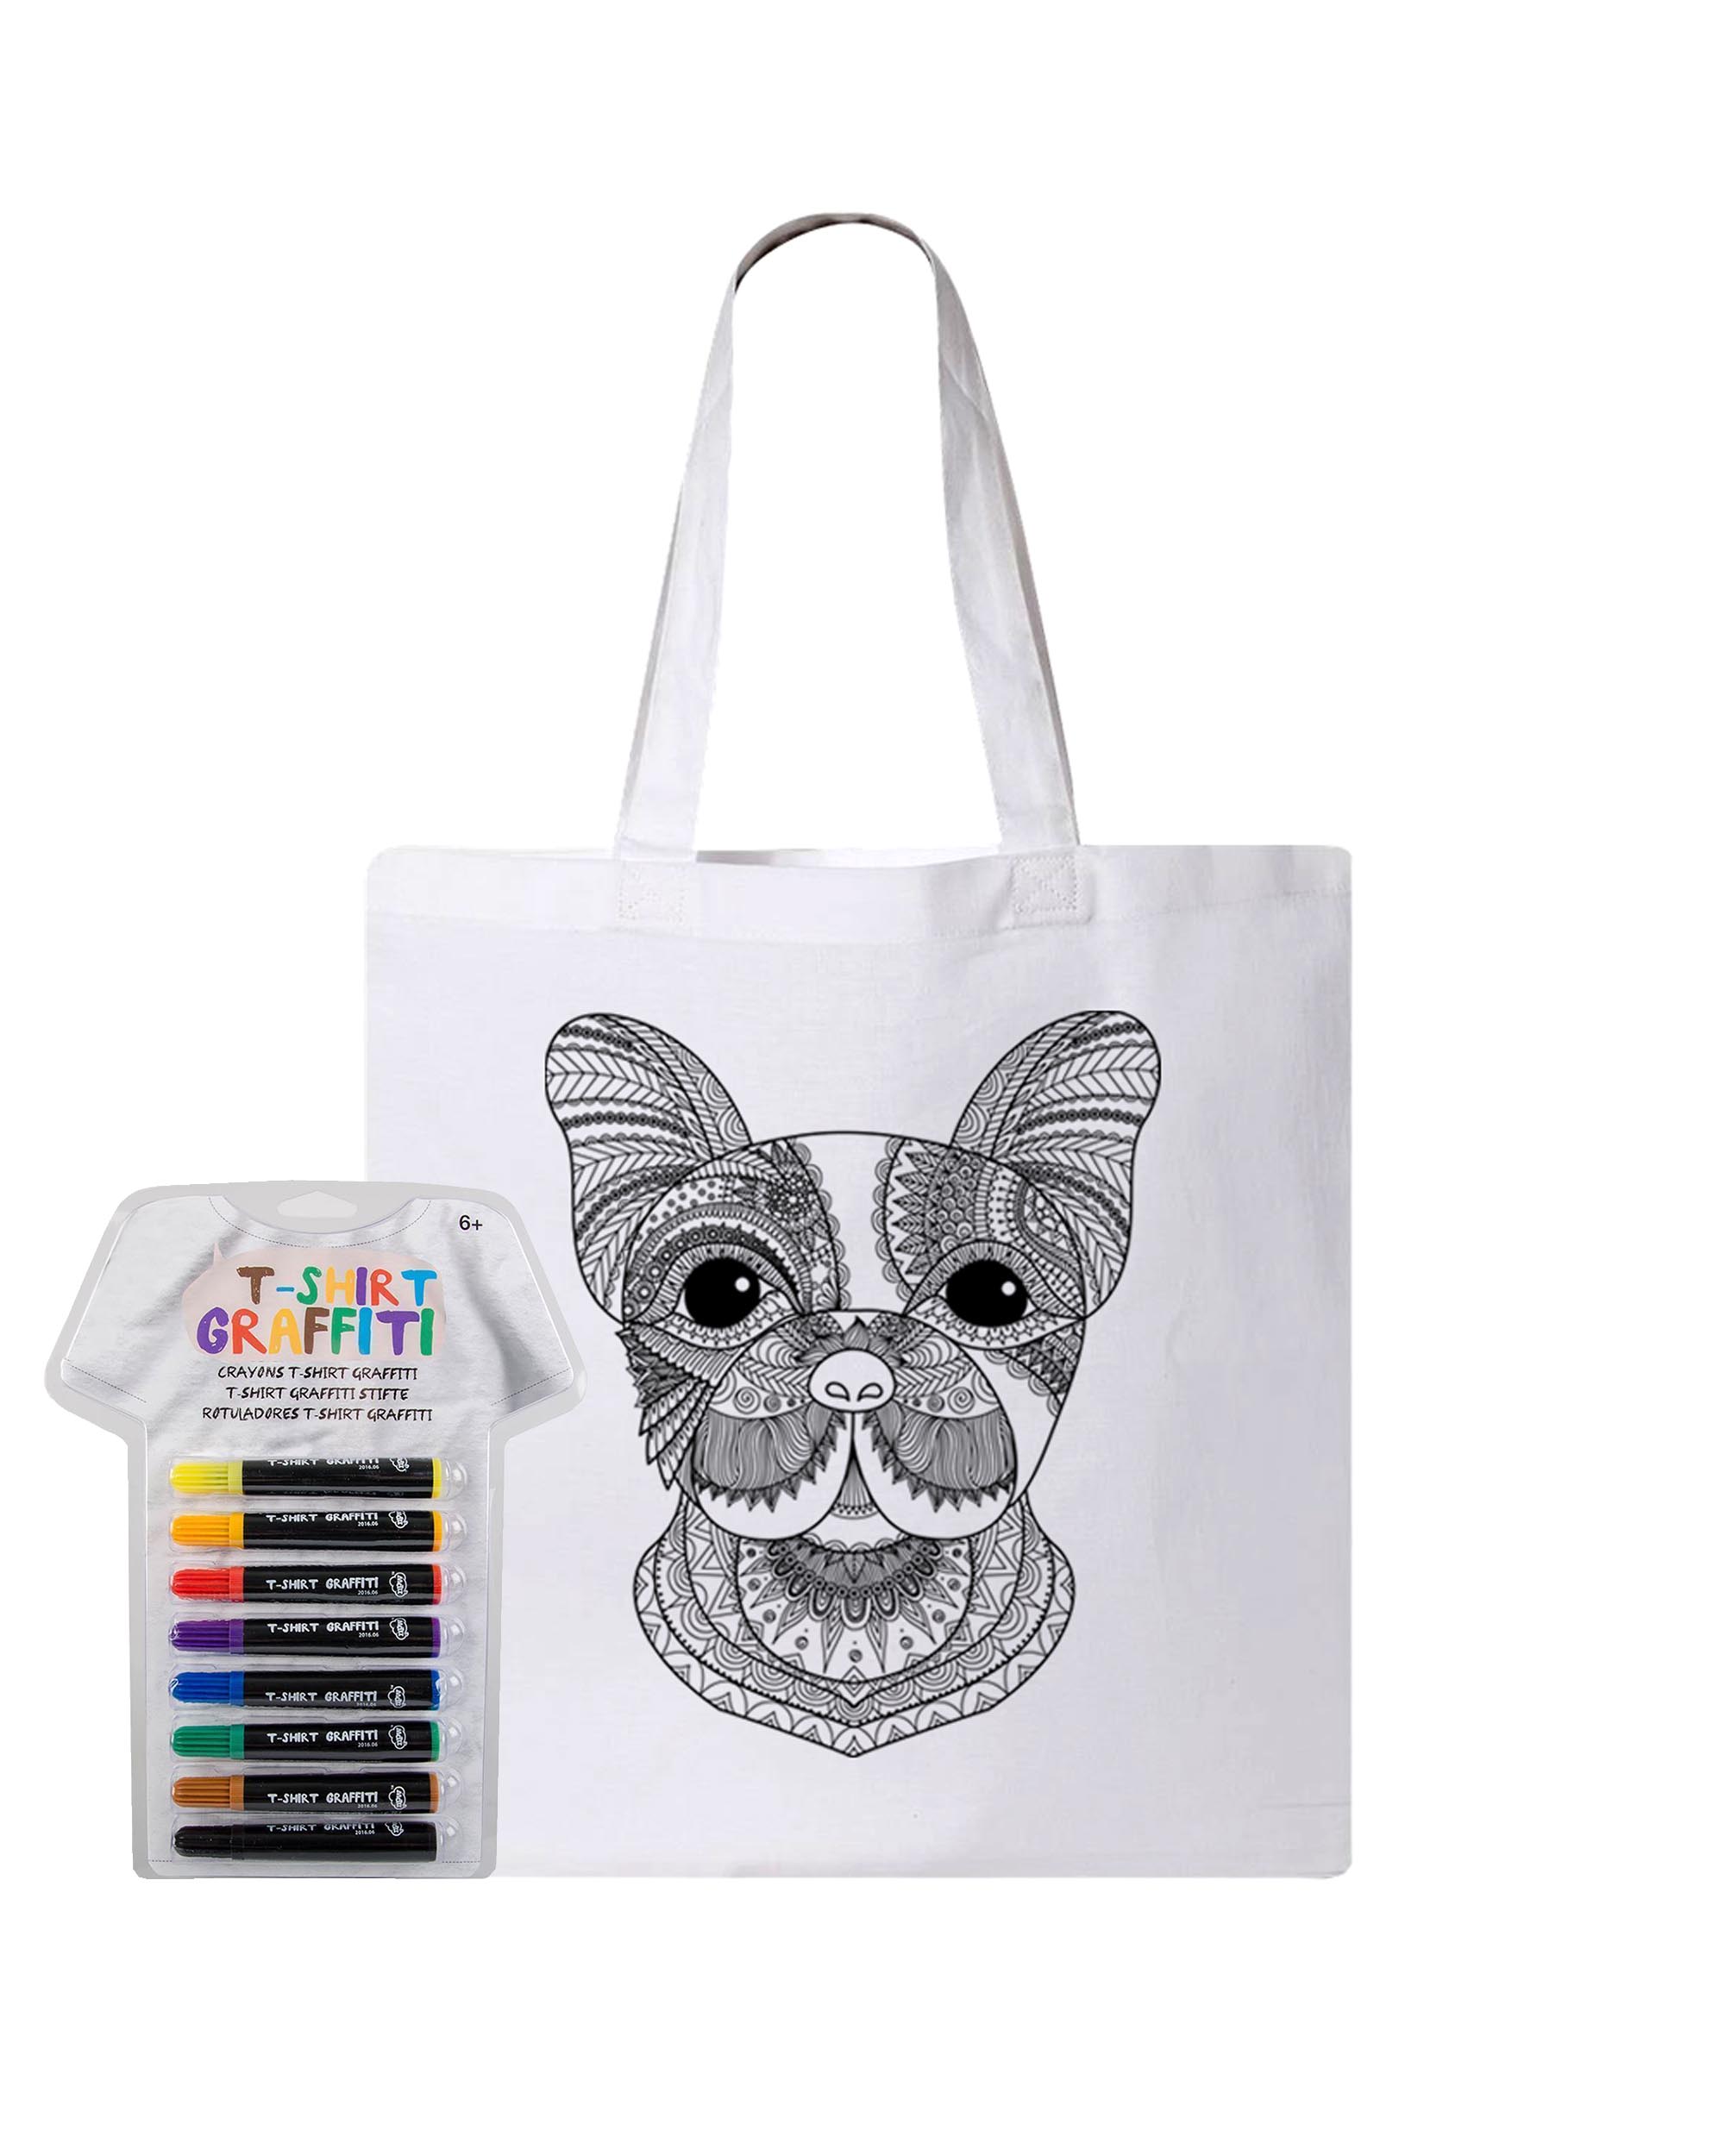 Dog Coloring White Canvas Tote Bag - Adorned By You